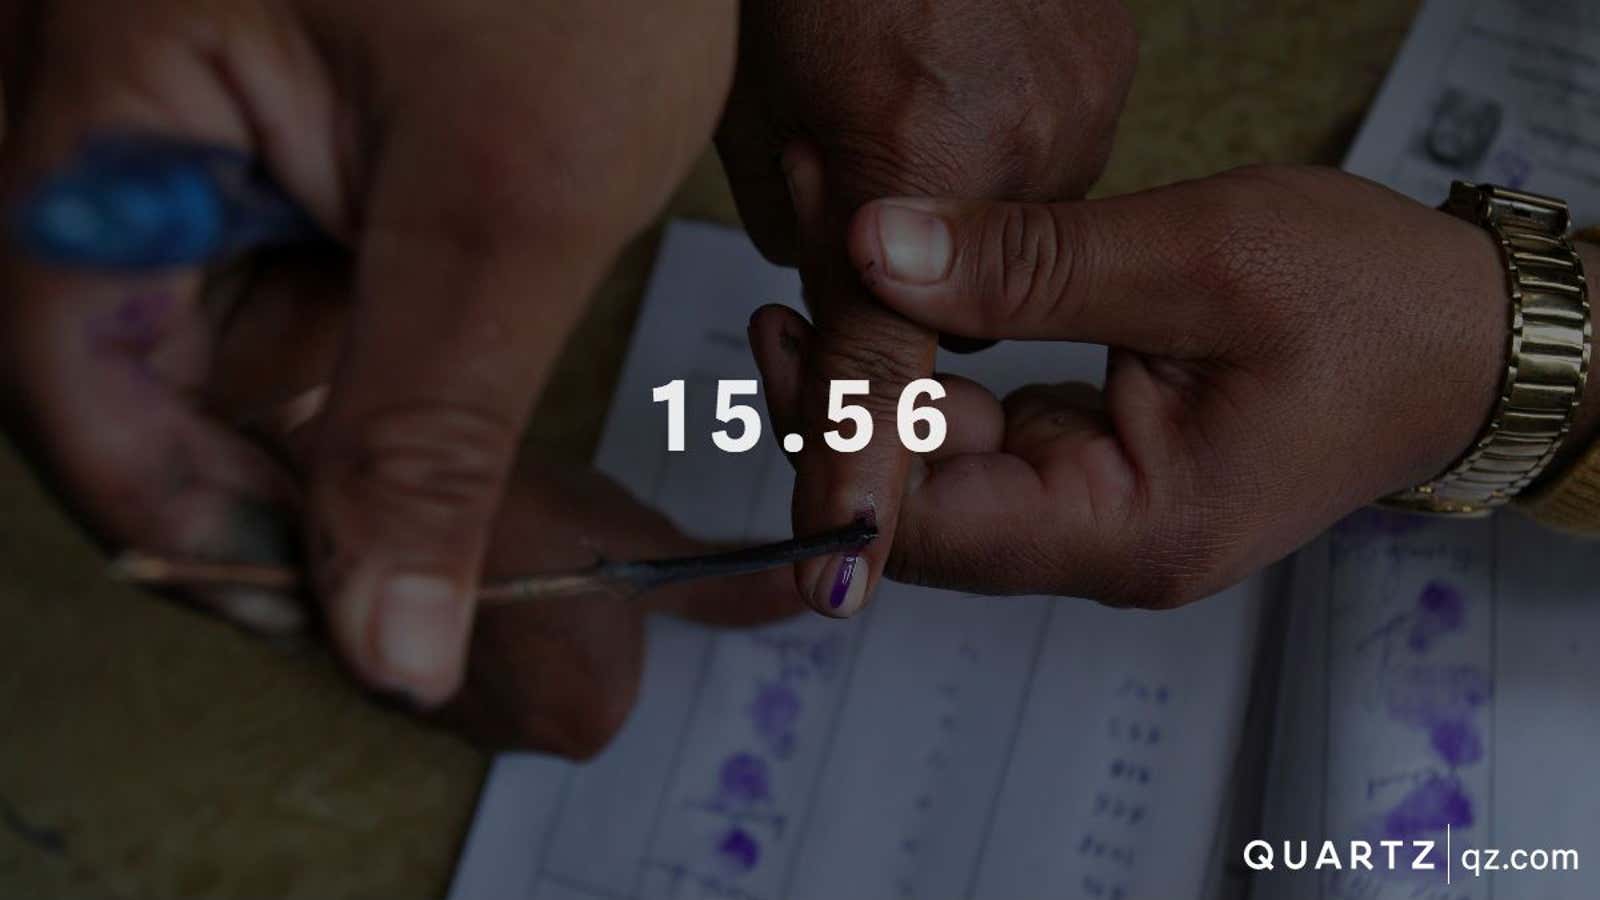 The number of candidates in India keeps growing with every election